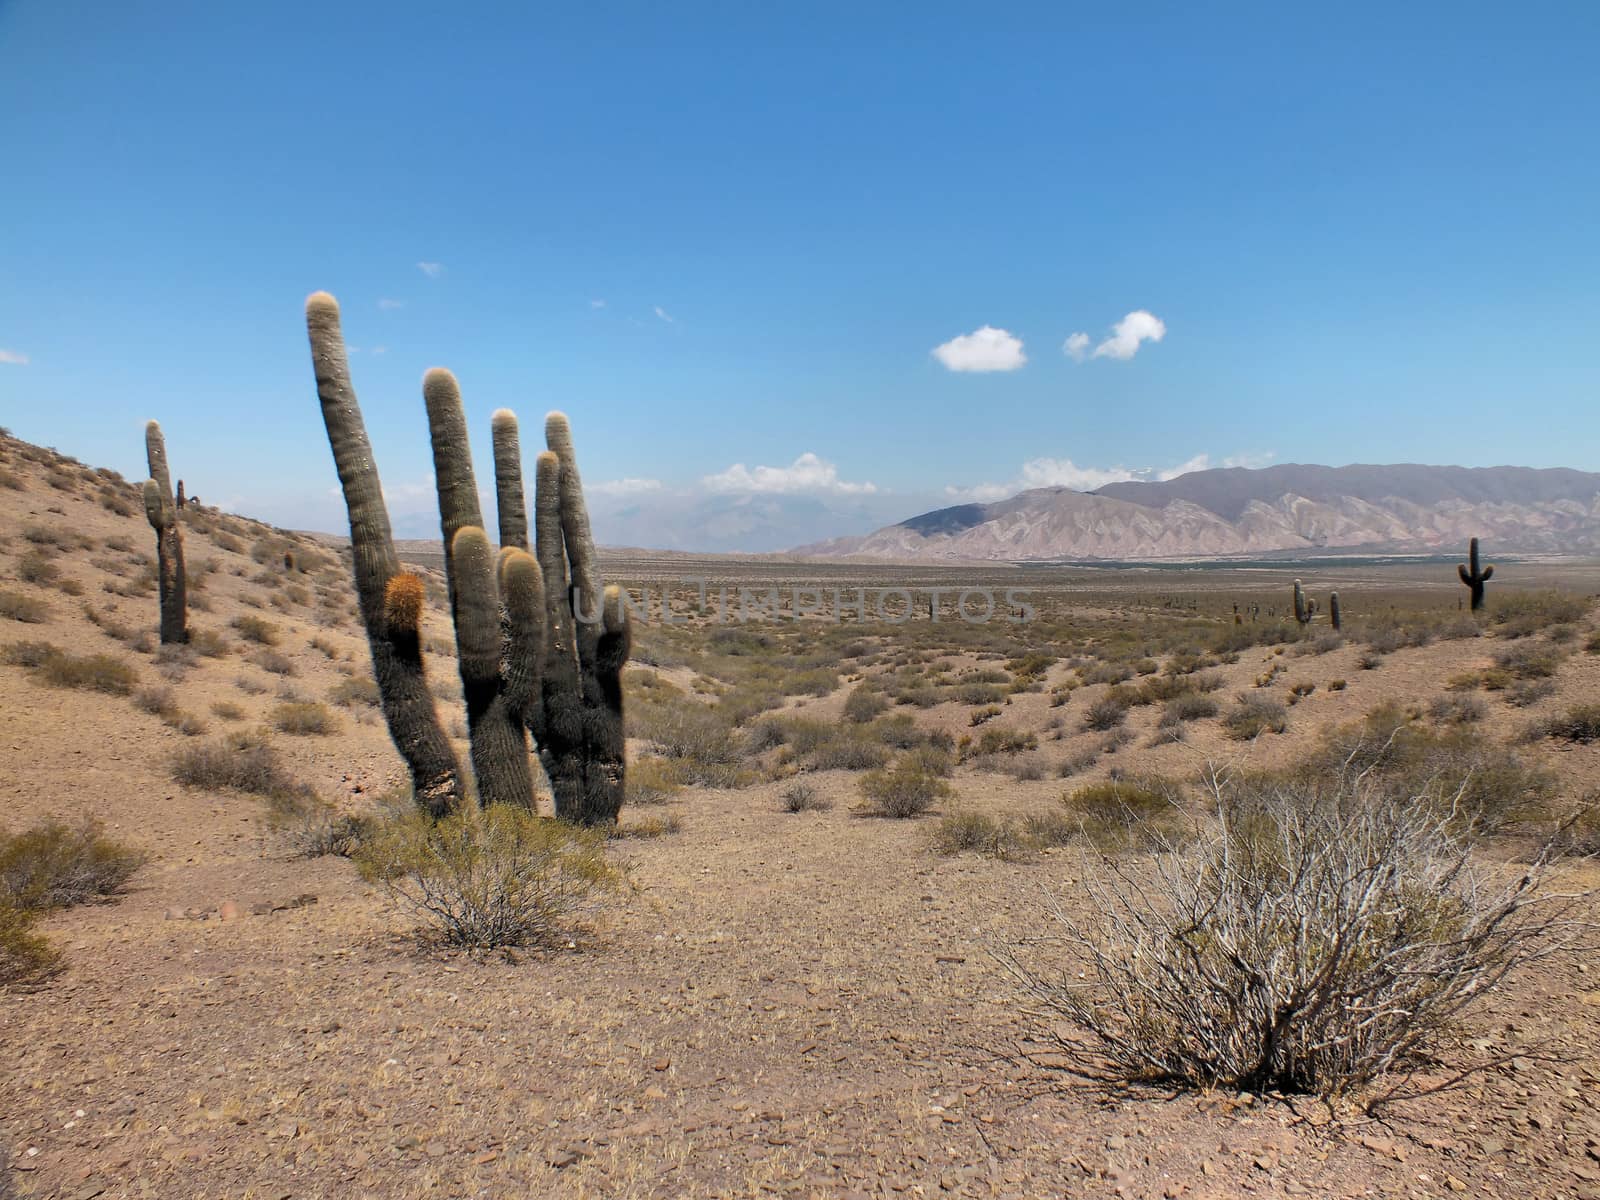 The Los Cardones National Park is an official reserve recently set up to protect the giant cacti such as the ones seen here. The 'cardones' grow only a few millimetres per year and their wood has been over-exploited in the past so they are now protected.